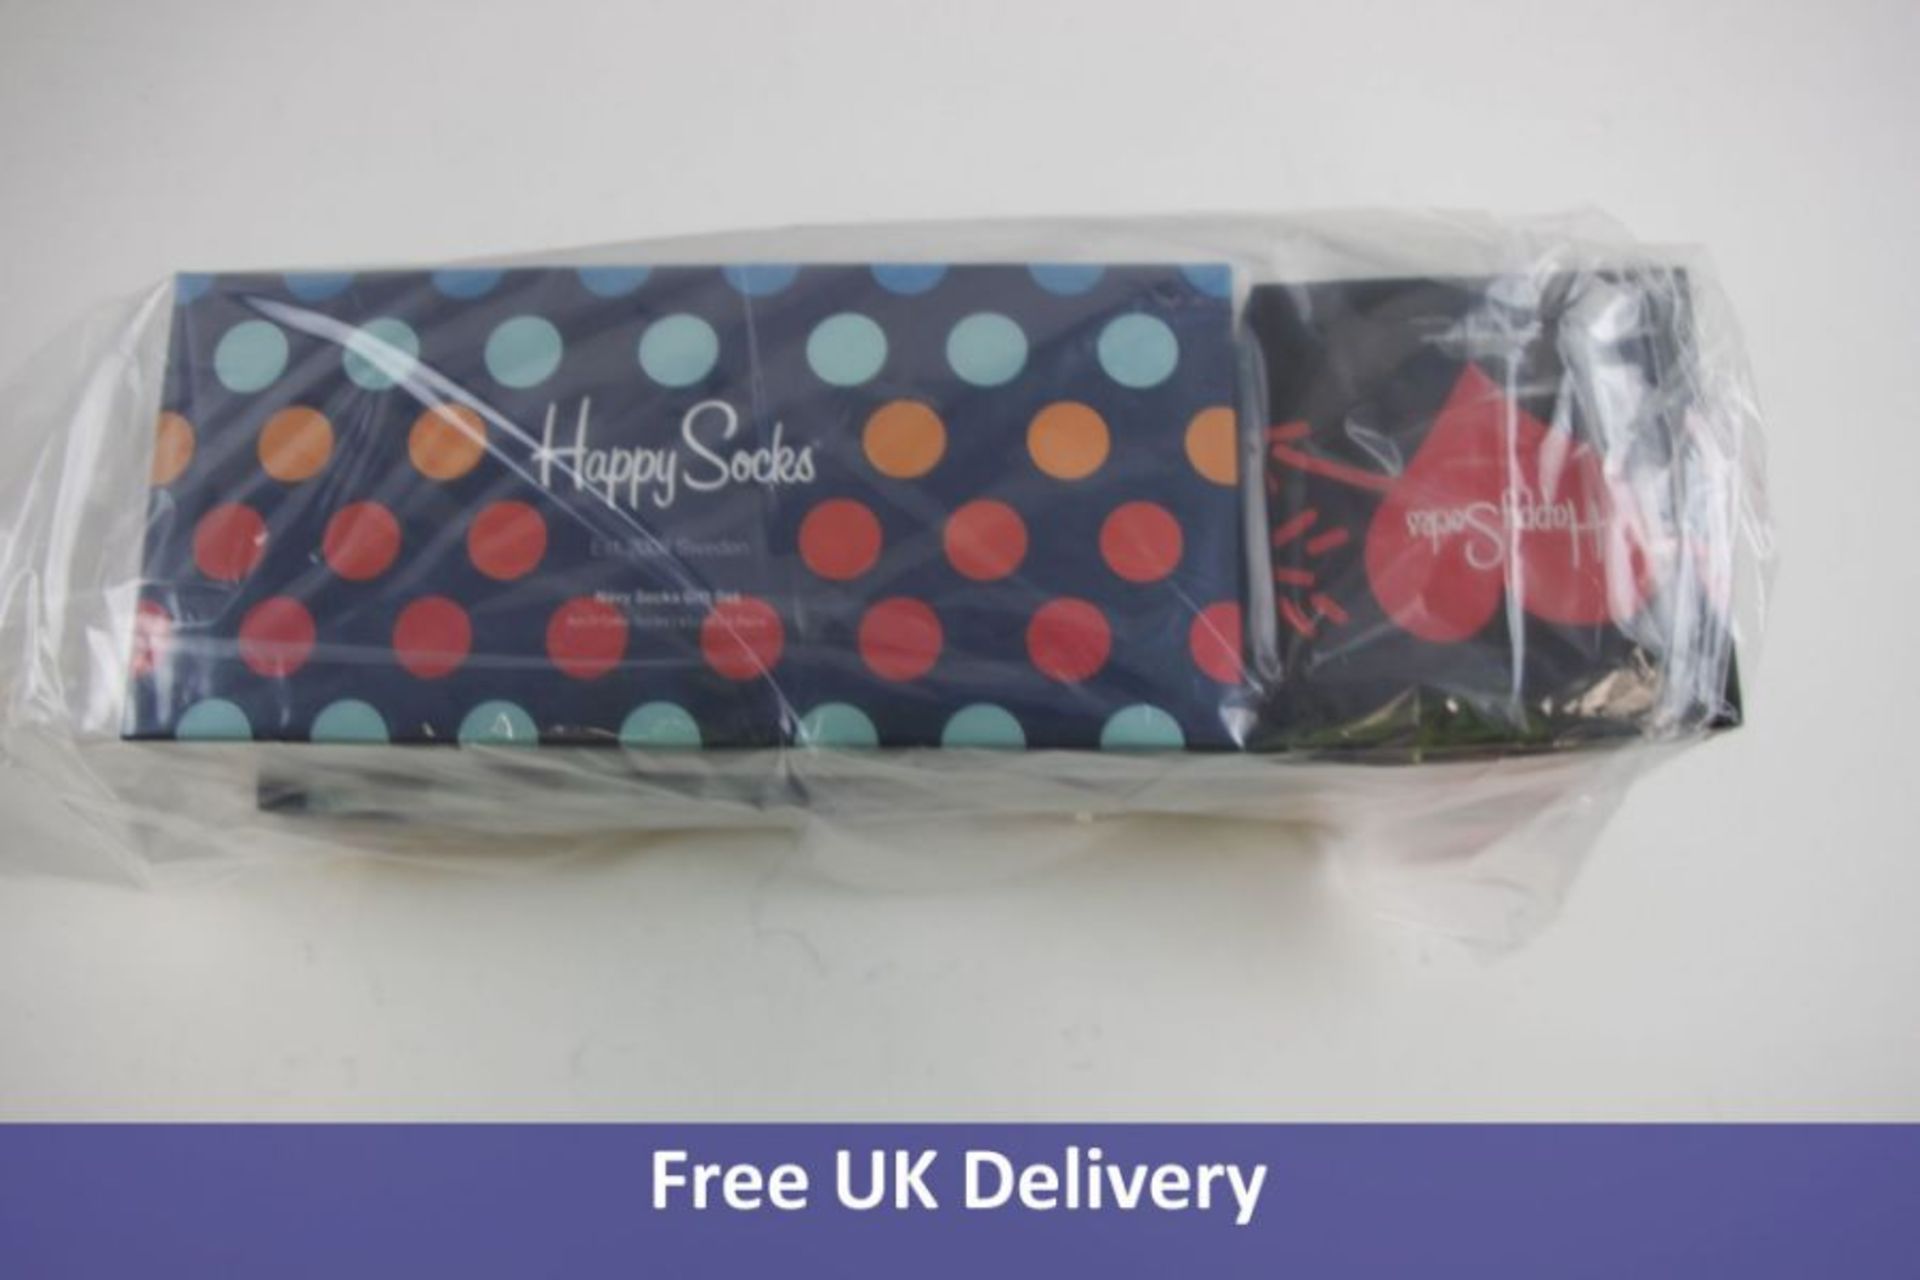 Three Packs of Happy Socks to Include 2x Holiday Big Dot Gift Box Socks, Pack of 4, Size 7-11 and 1x